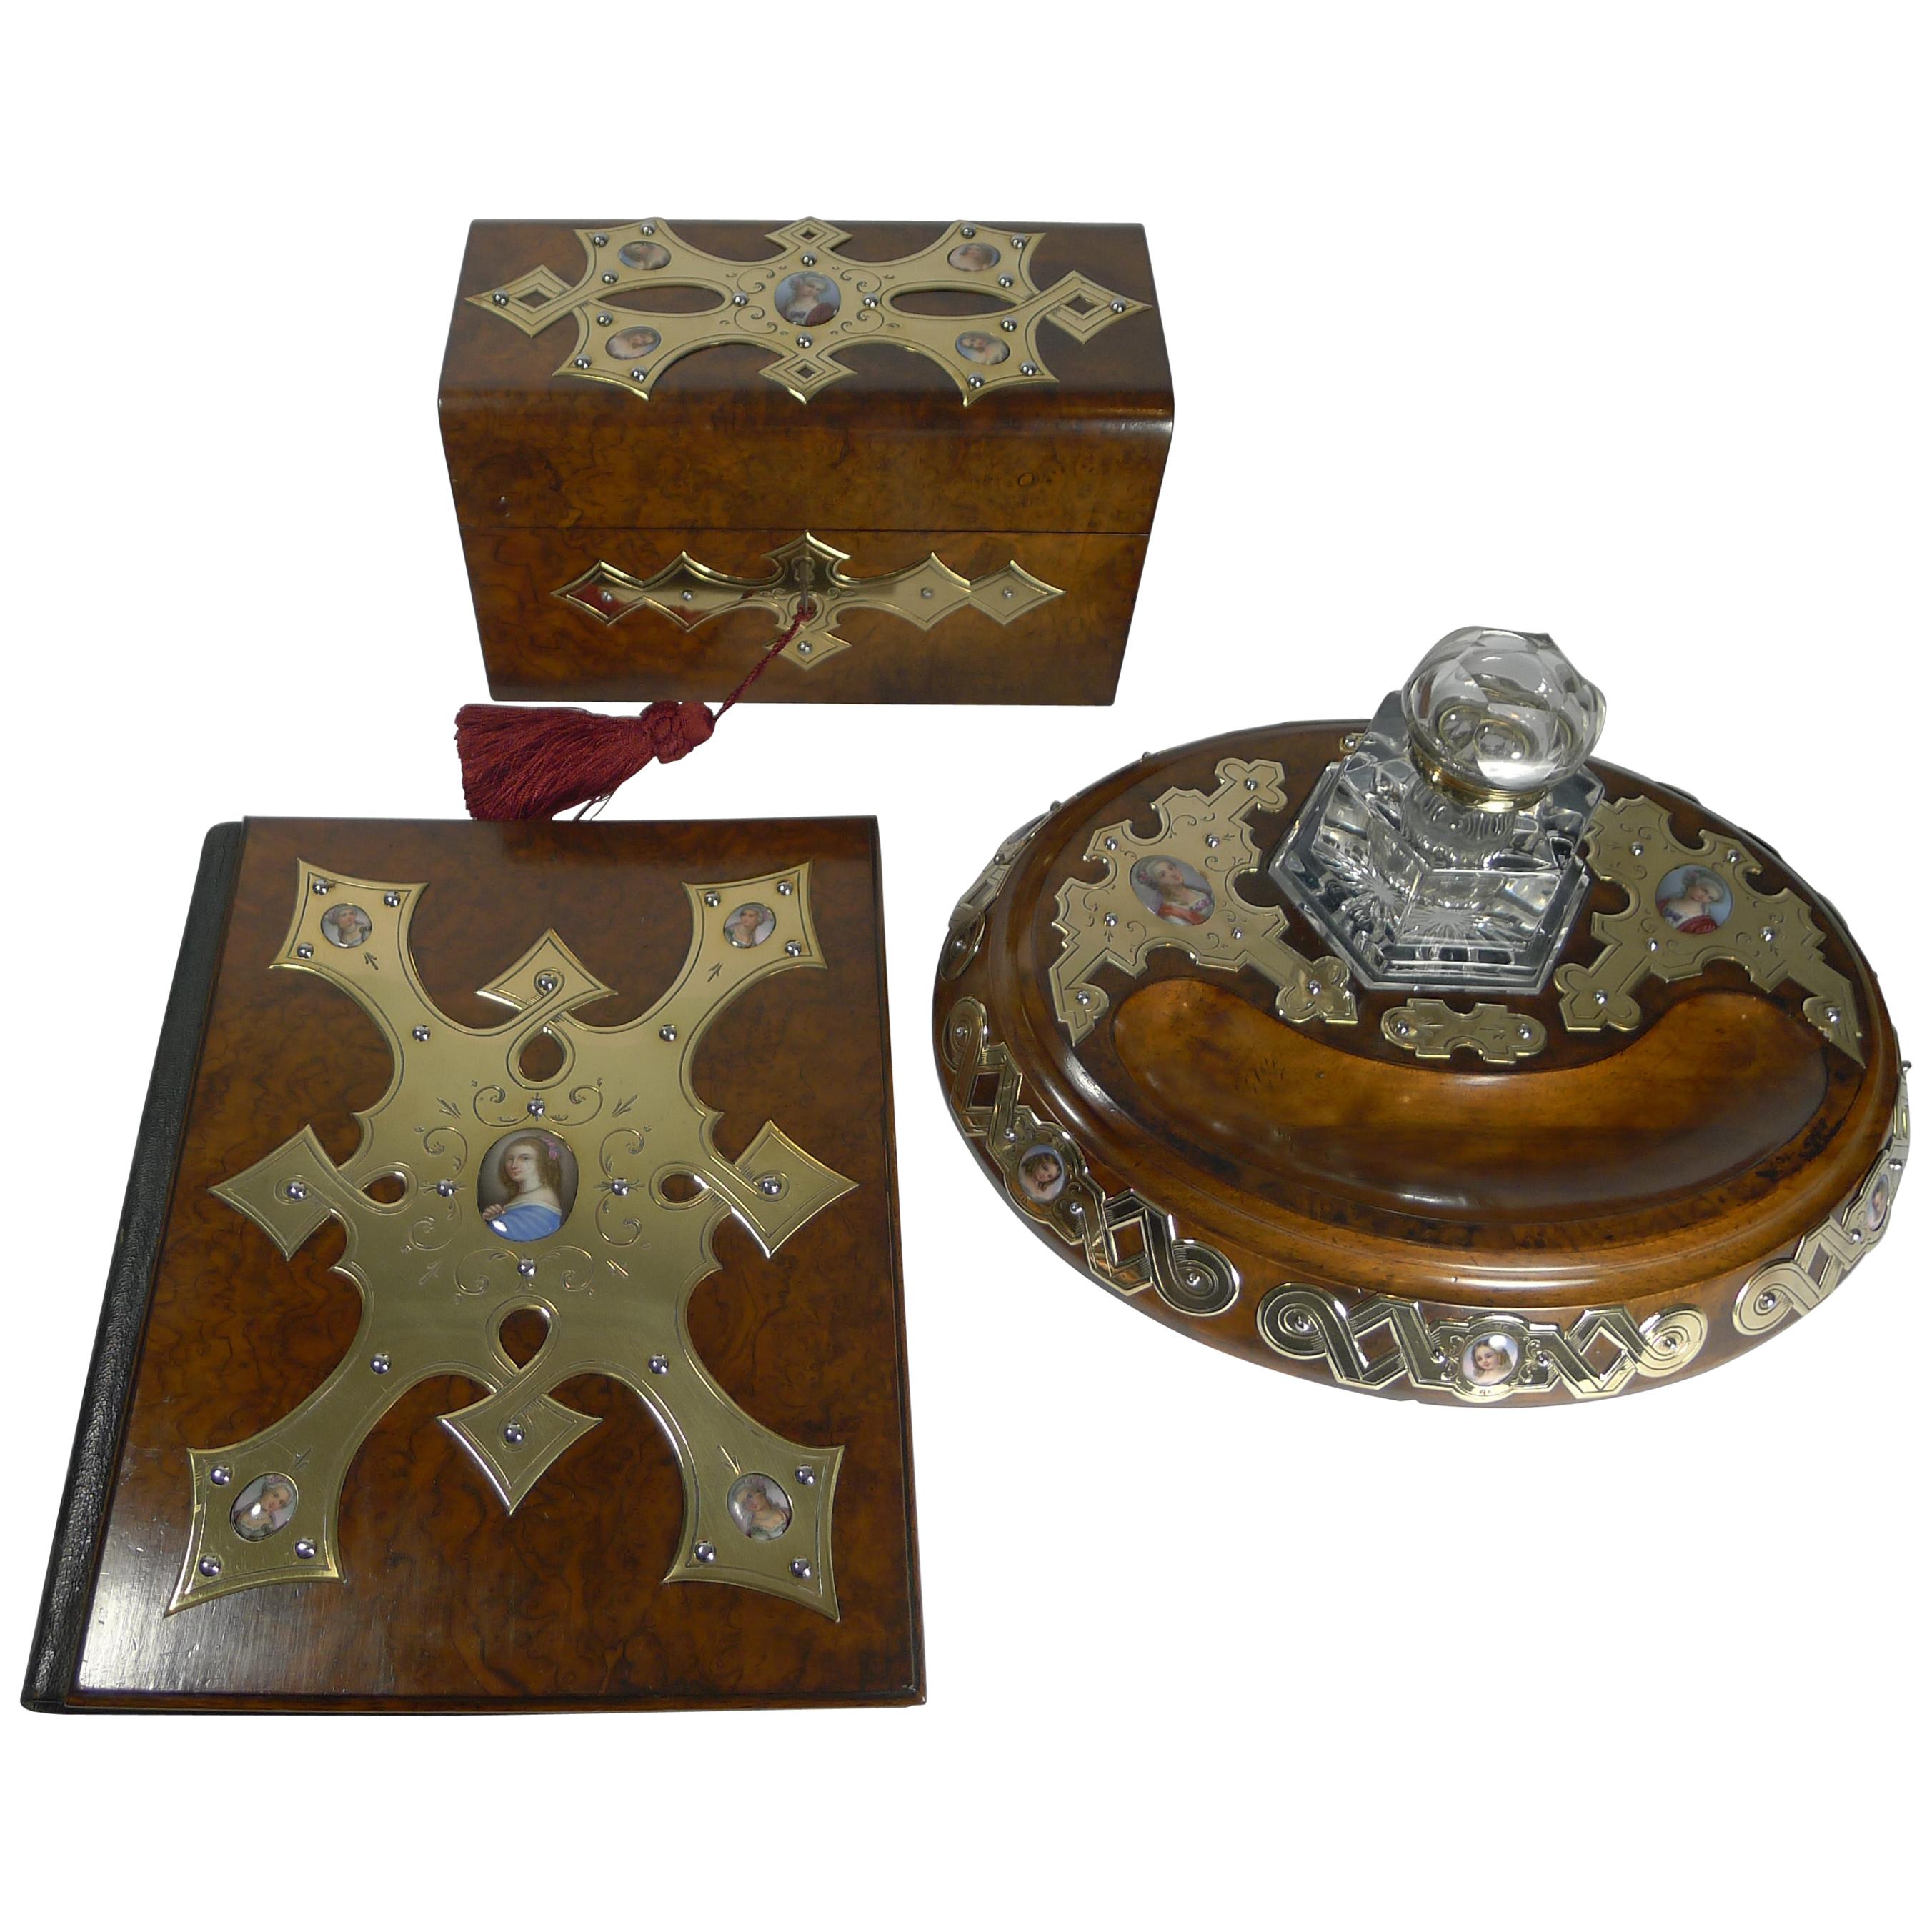 Grand French Three-Piece Desk Set, Hand Painted Porcelain Inset, circa 1860